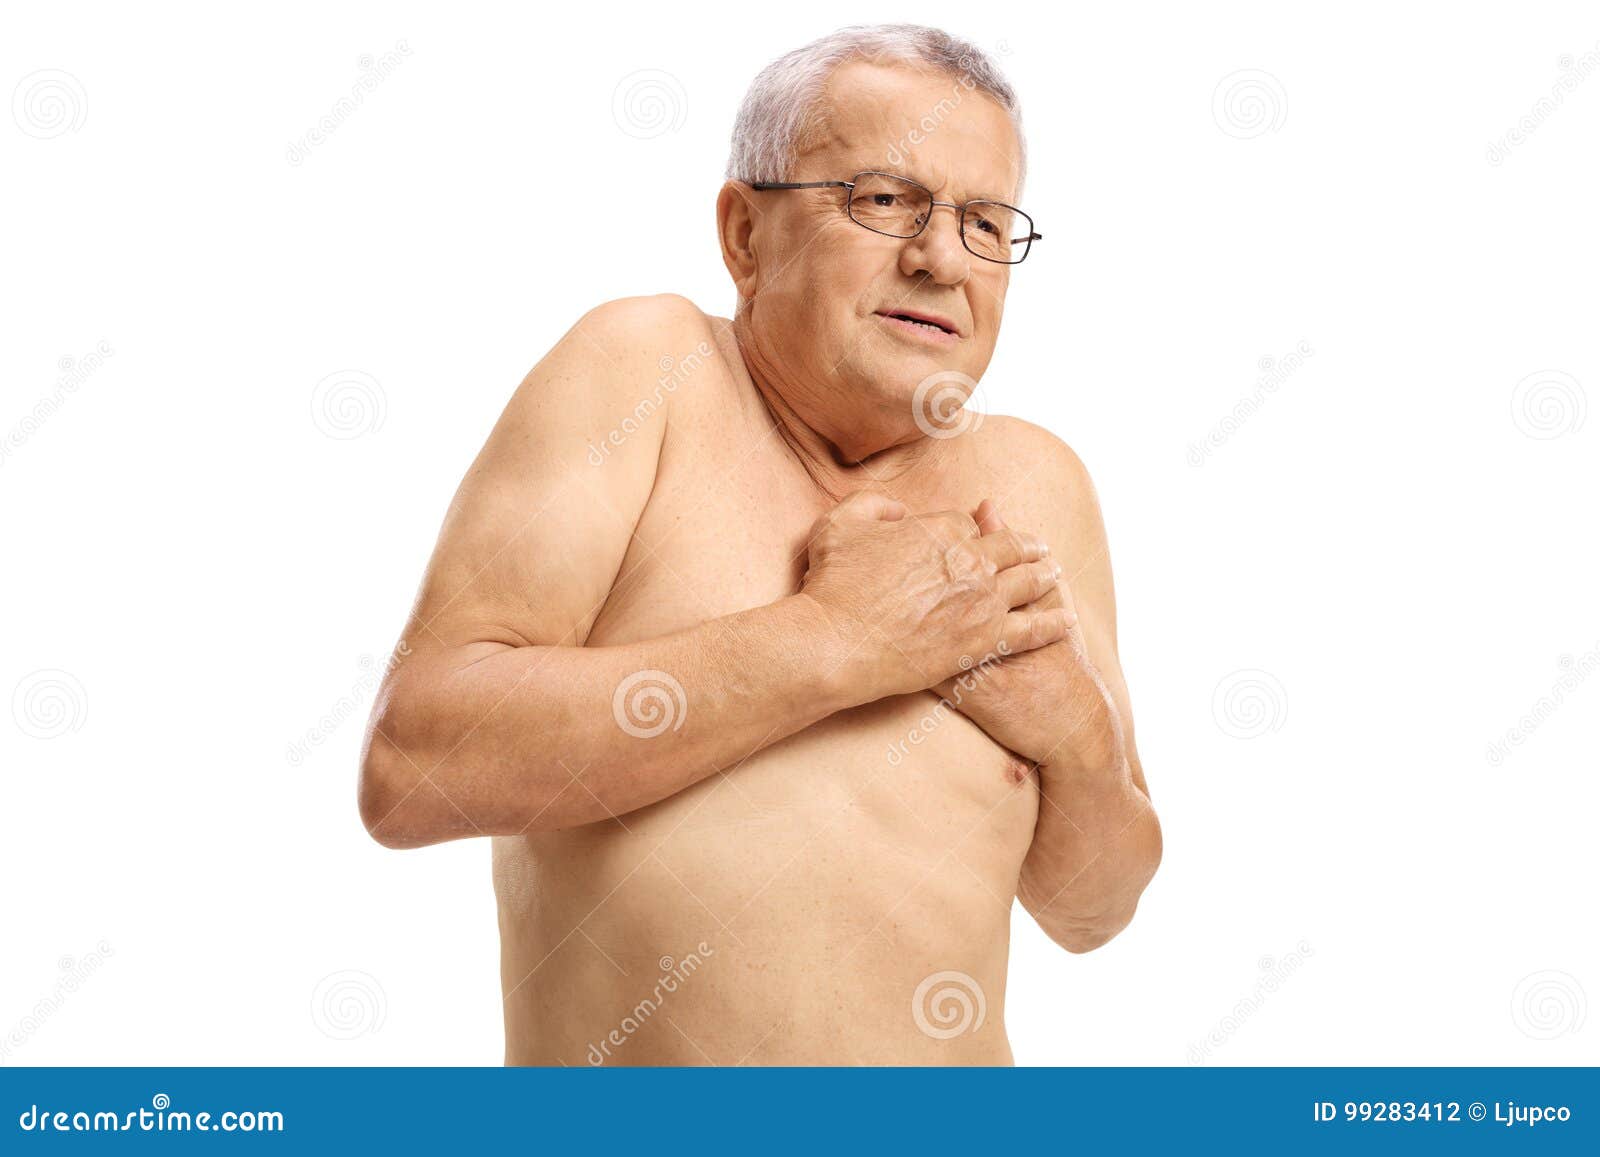 BUFF BEARDED GREY GRAY HAIRED MATURE OLDER BUILT SHIRTLESS MALE ON COUCH PHOTO 